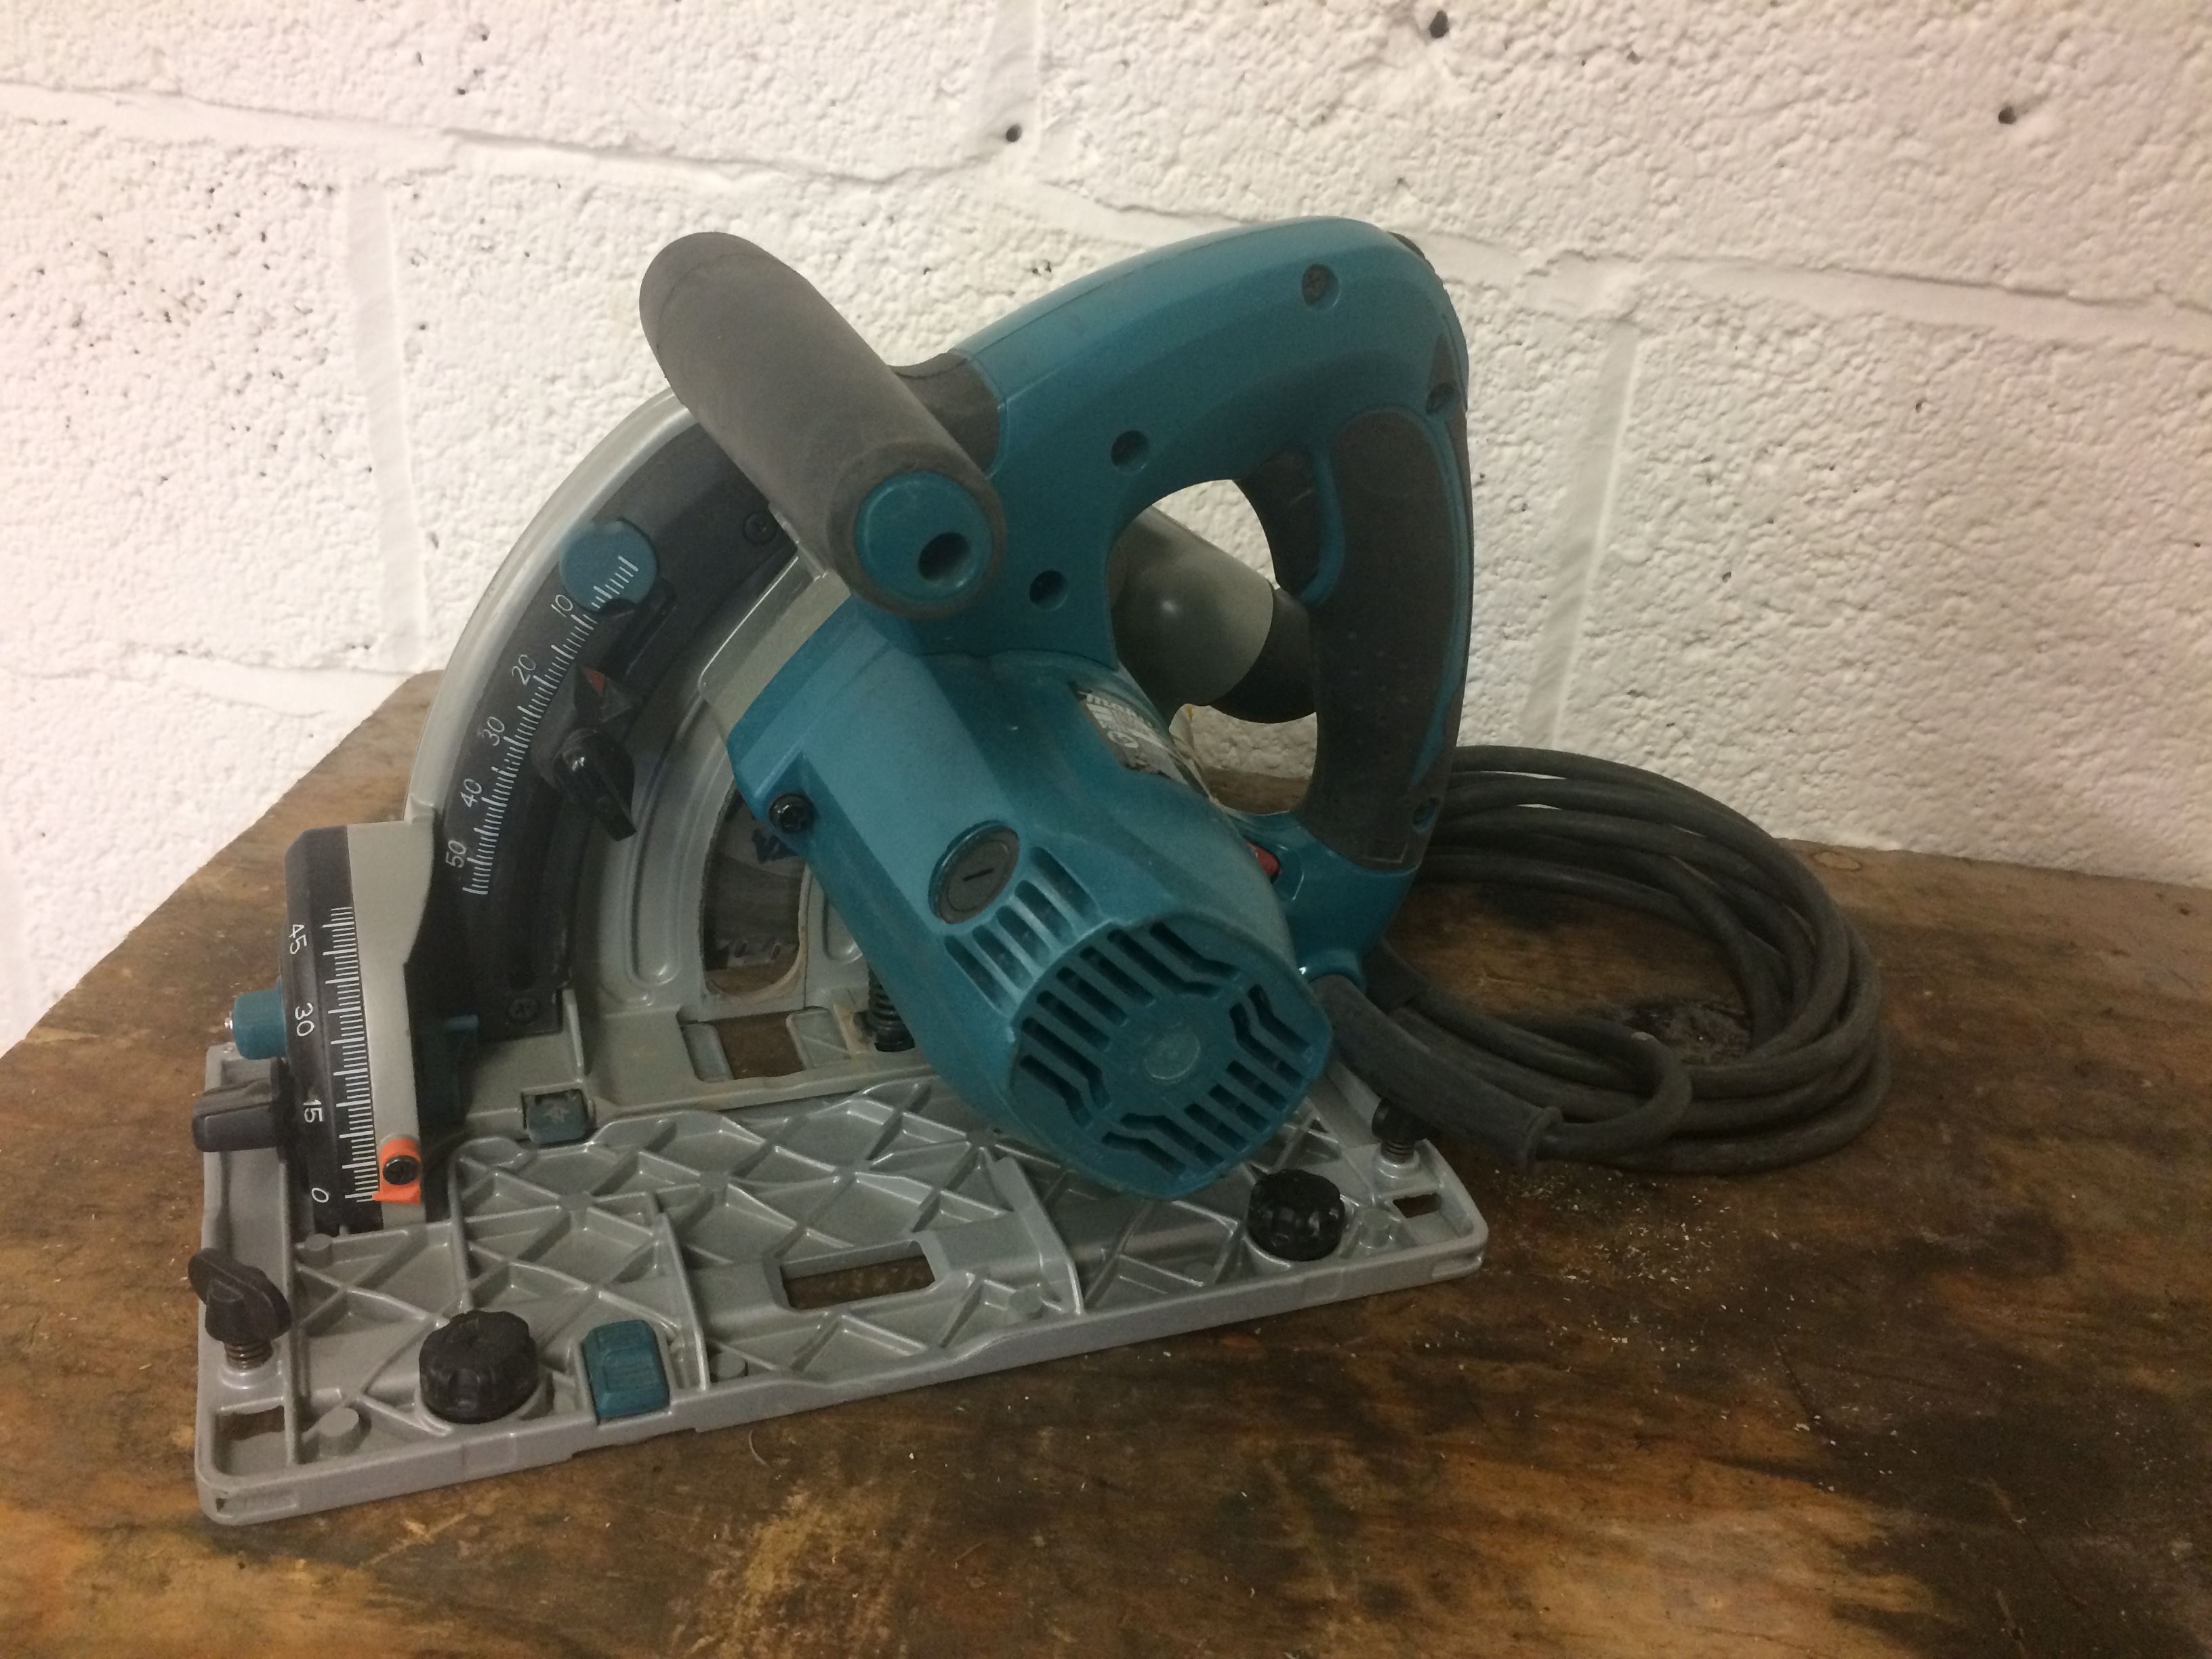 Track Plunge Saw Saws